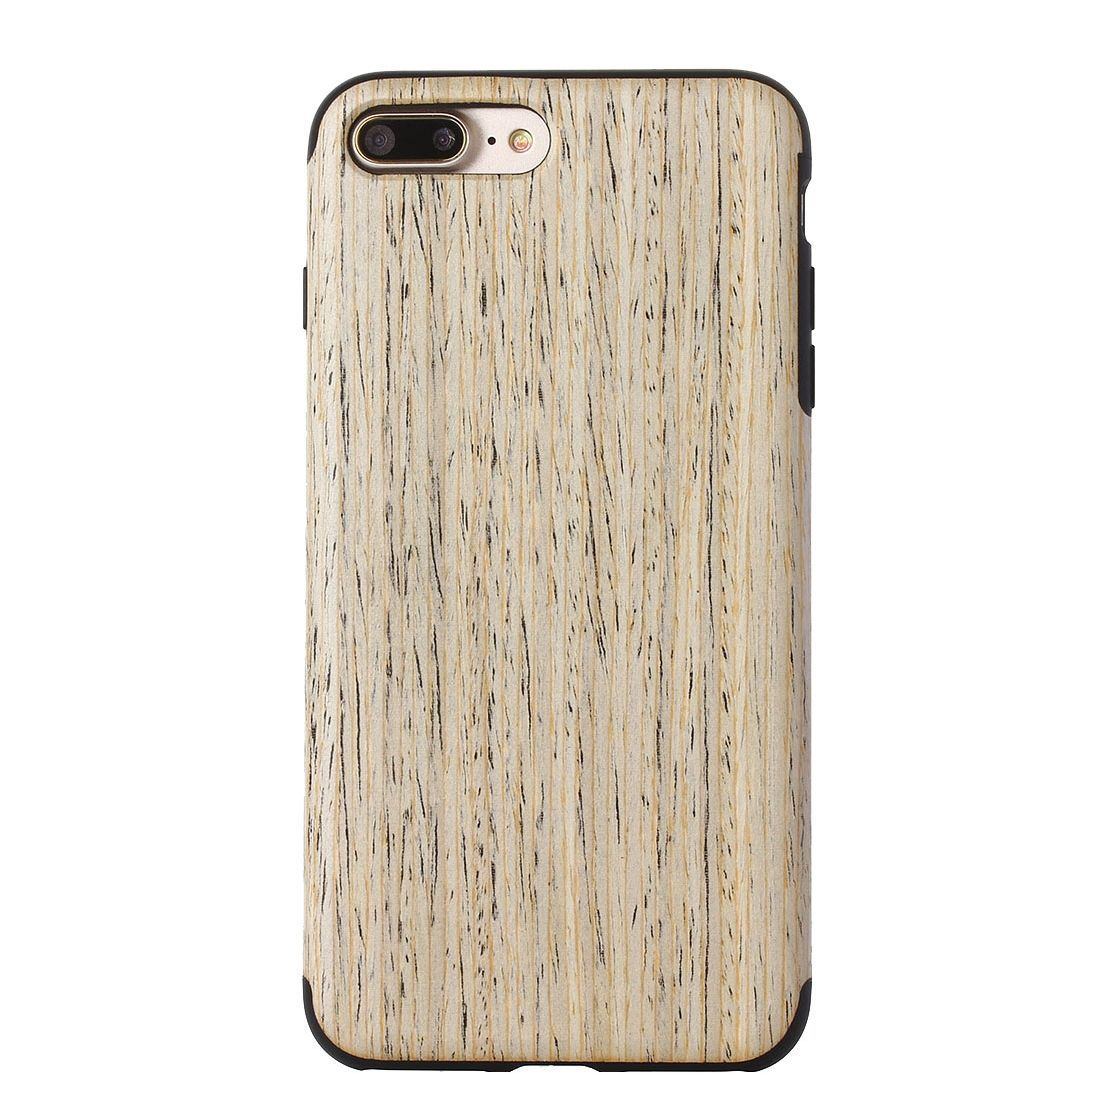 For iPhone 8 PLUS,7 PLUS Case,Walnut Wooden Durable Grain TPU Protective Cover